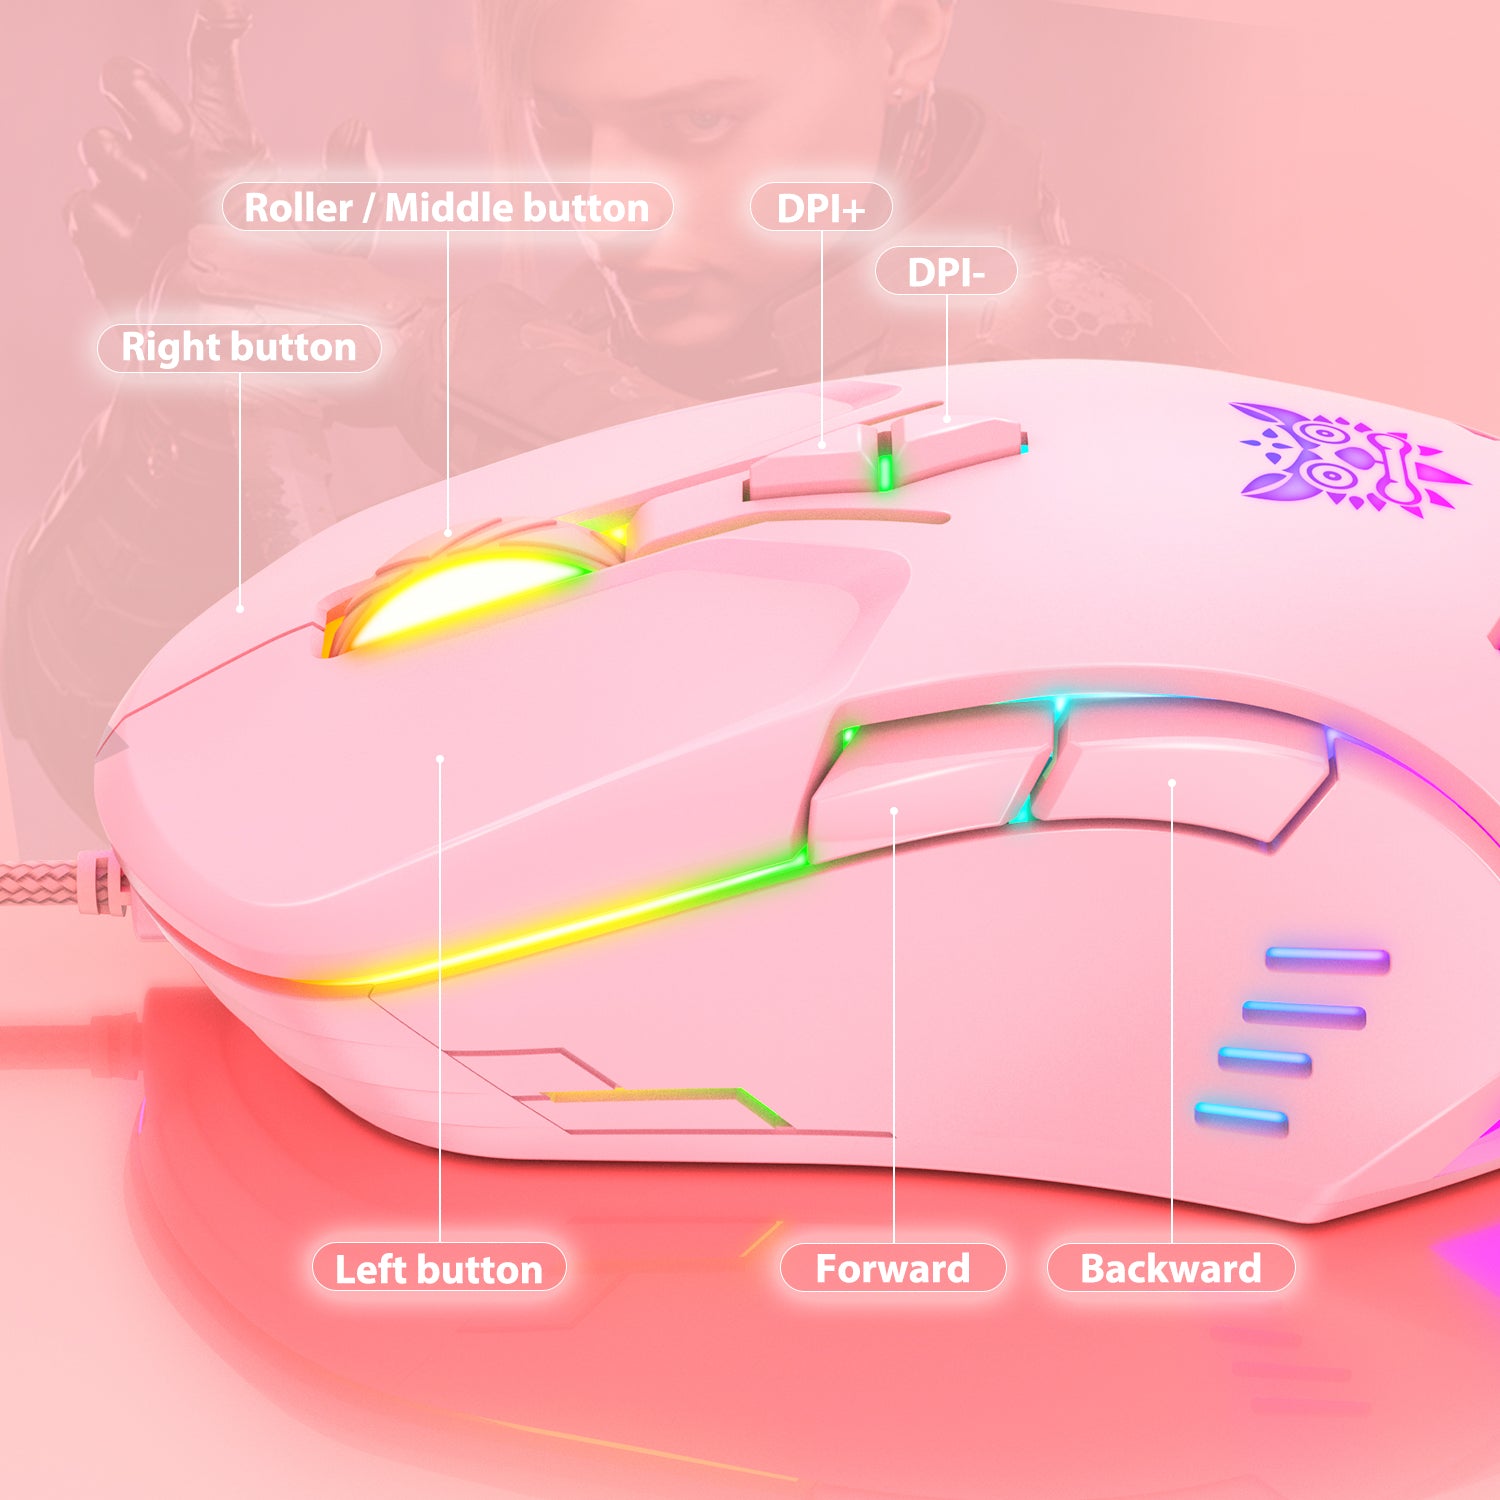 RGB WIRED GAMING MOUSE // CW902 - GTRACING